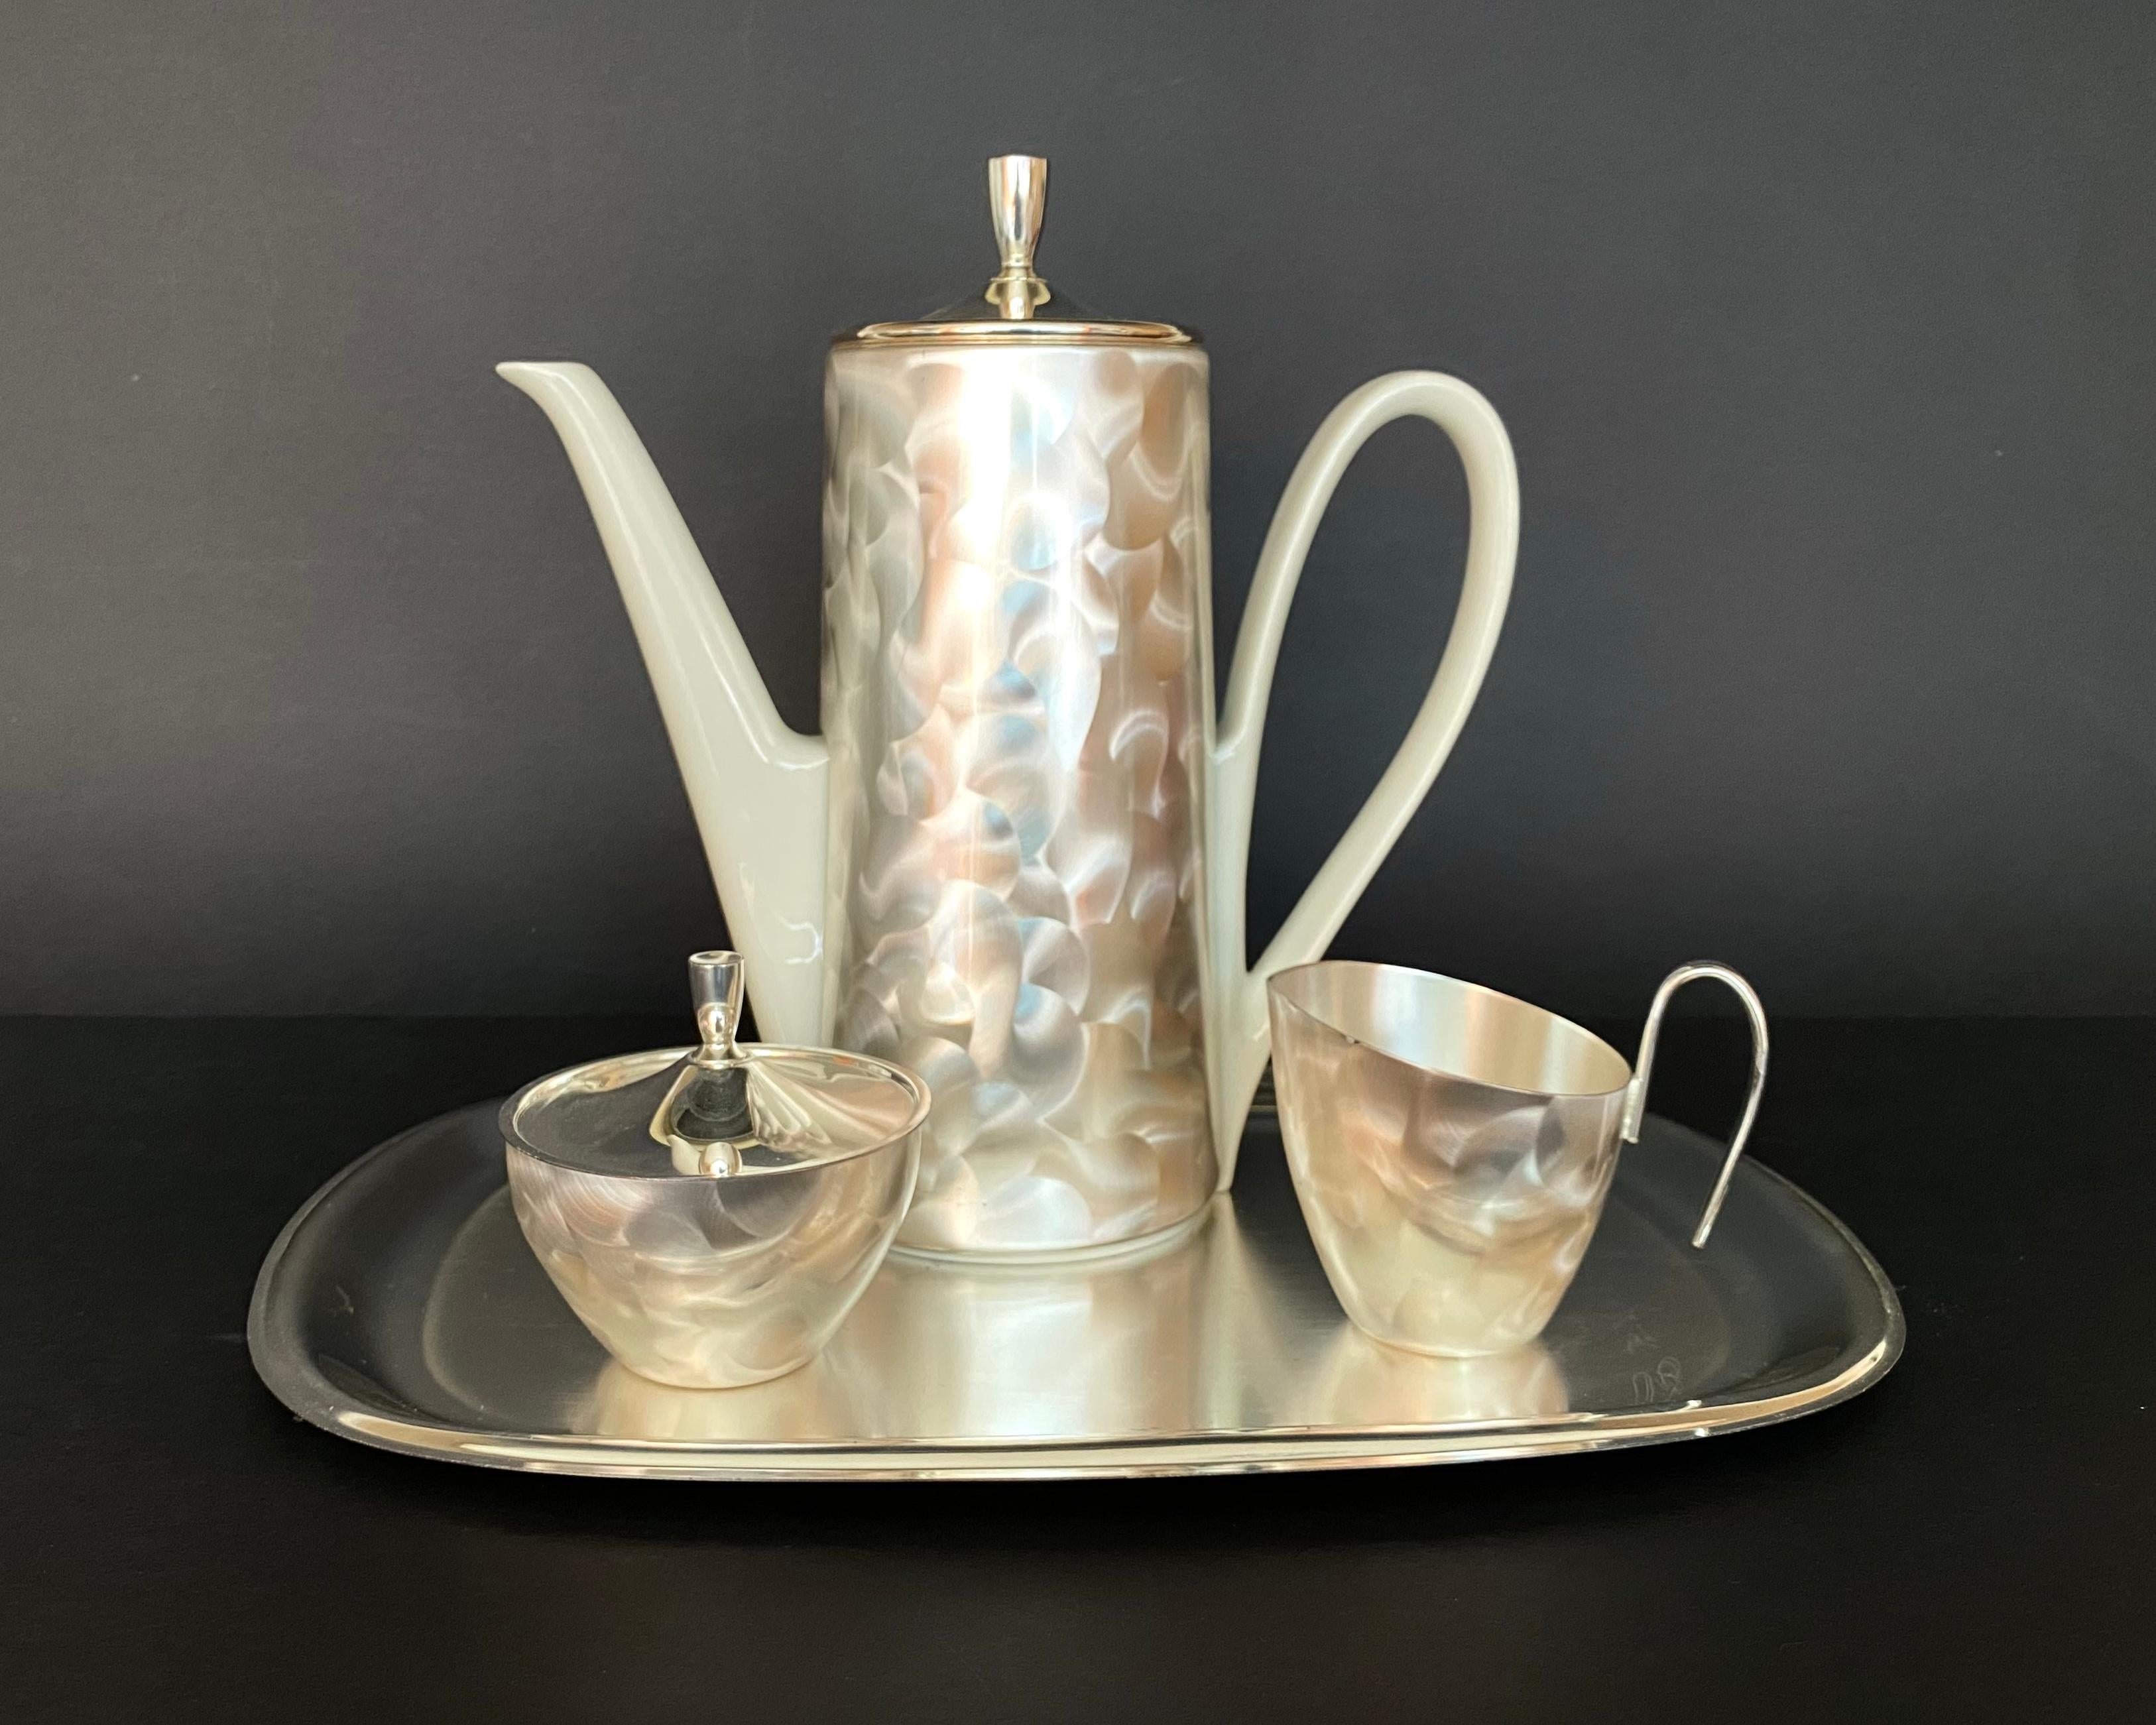 Elegant New Metal Coffee/Tea Set.

Porcelain Teapot, Creamer, Sugar Bowl & Tray By BMF Bavaria, Germany, 1970. 

Coffee Pot With removable thermal hood to keep warm insulated with felt on the inside.

Beautiful set in Bauhaus style.

Marked